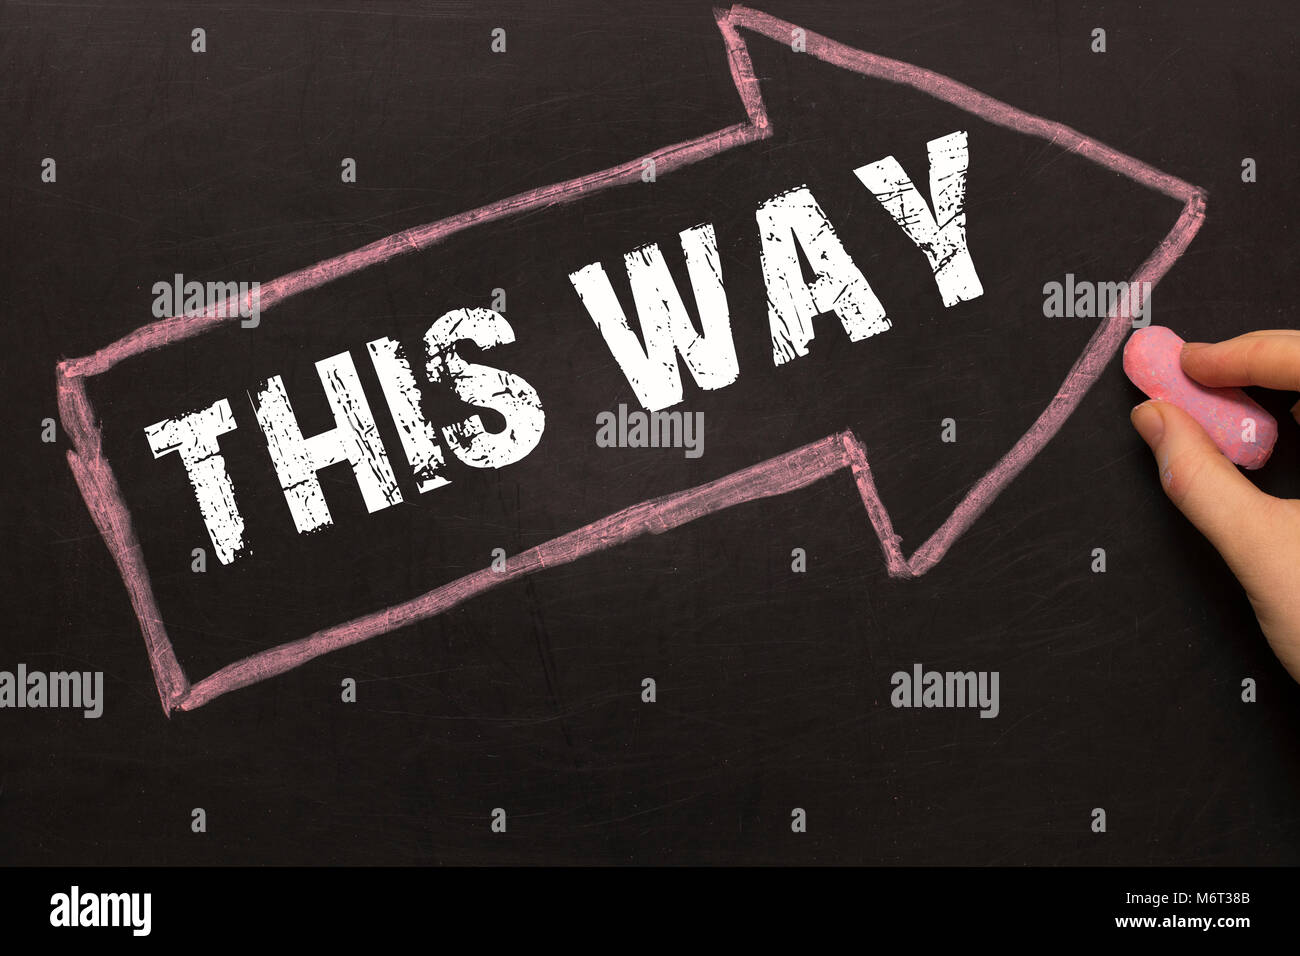 This way - Chalkboard with arrow on black background Stock Photo